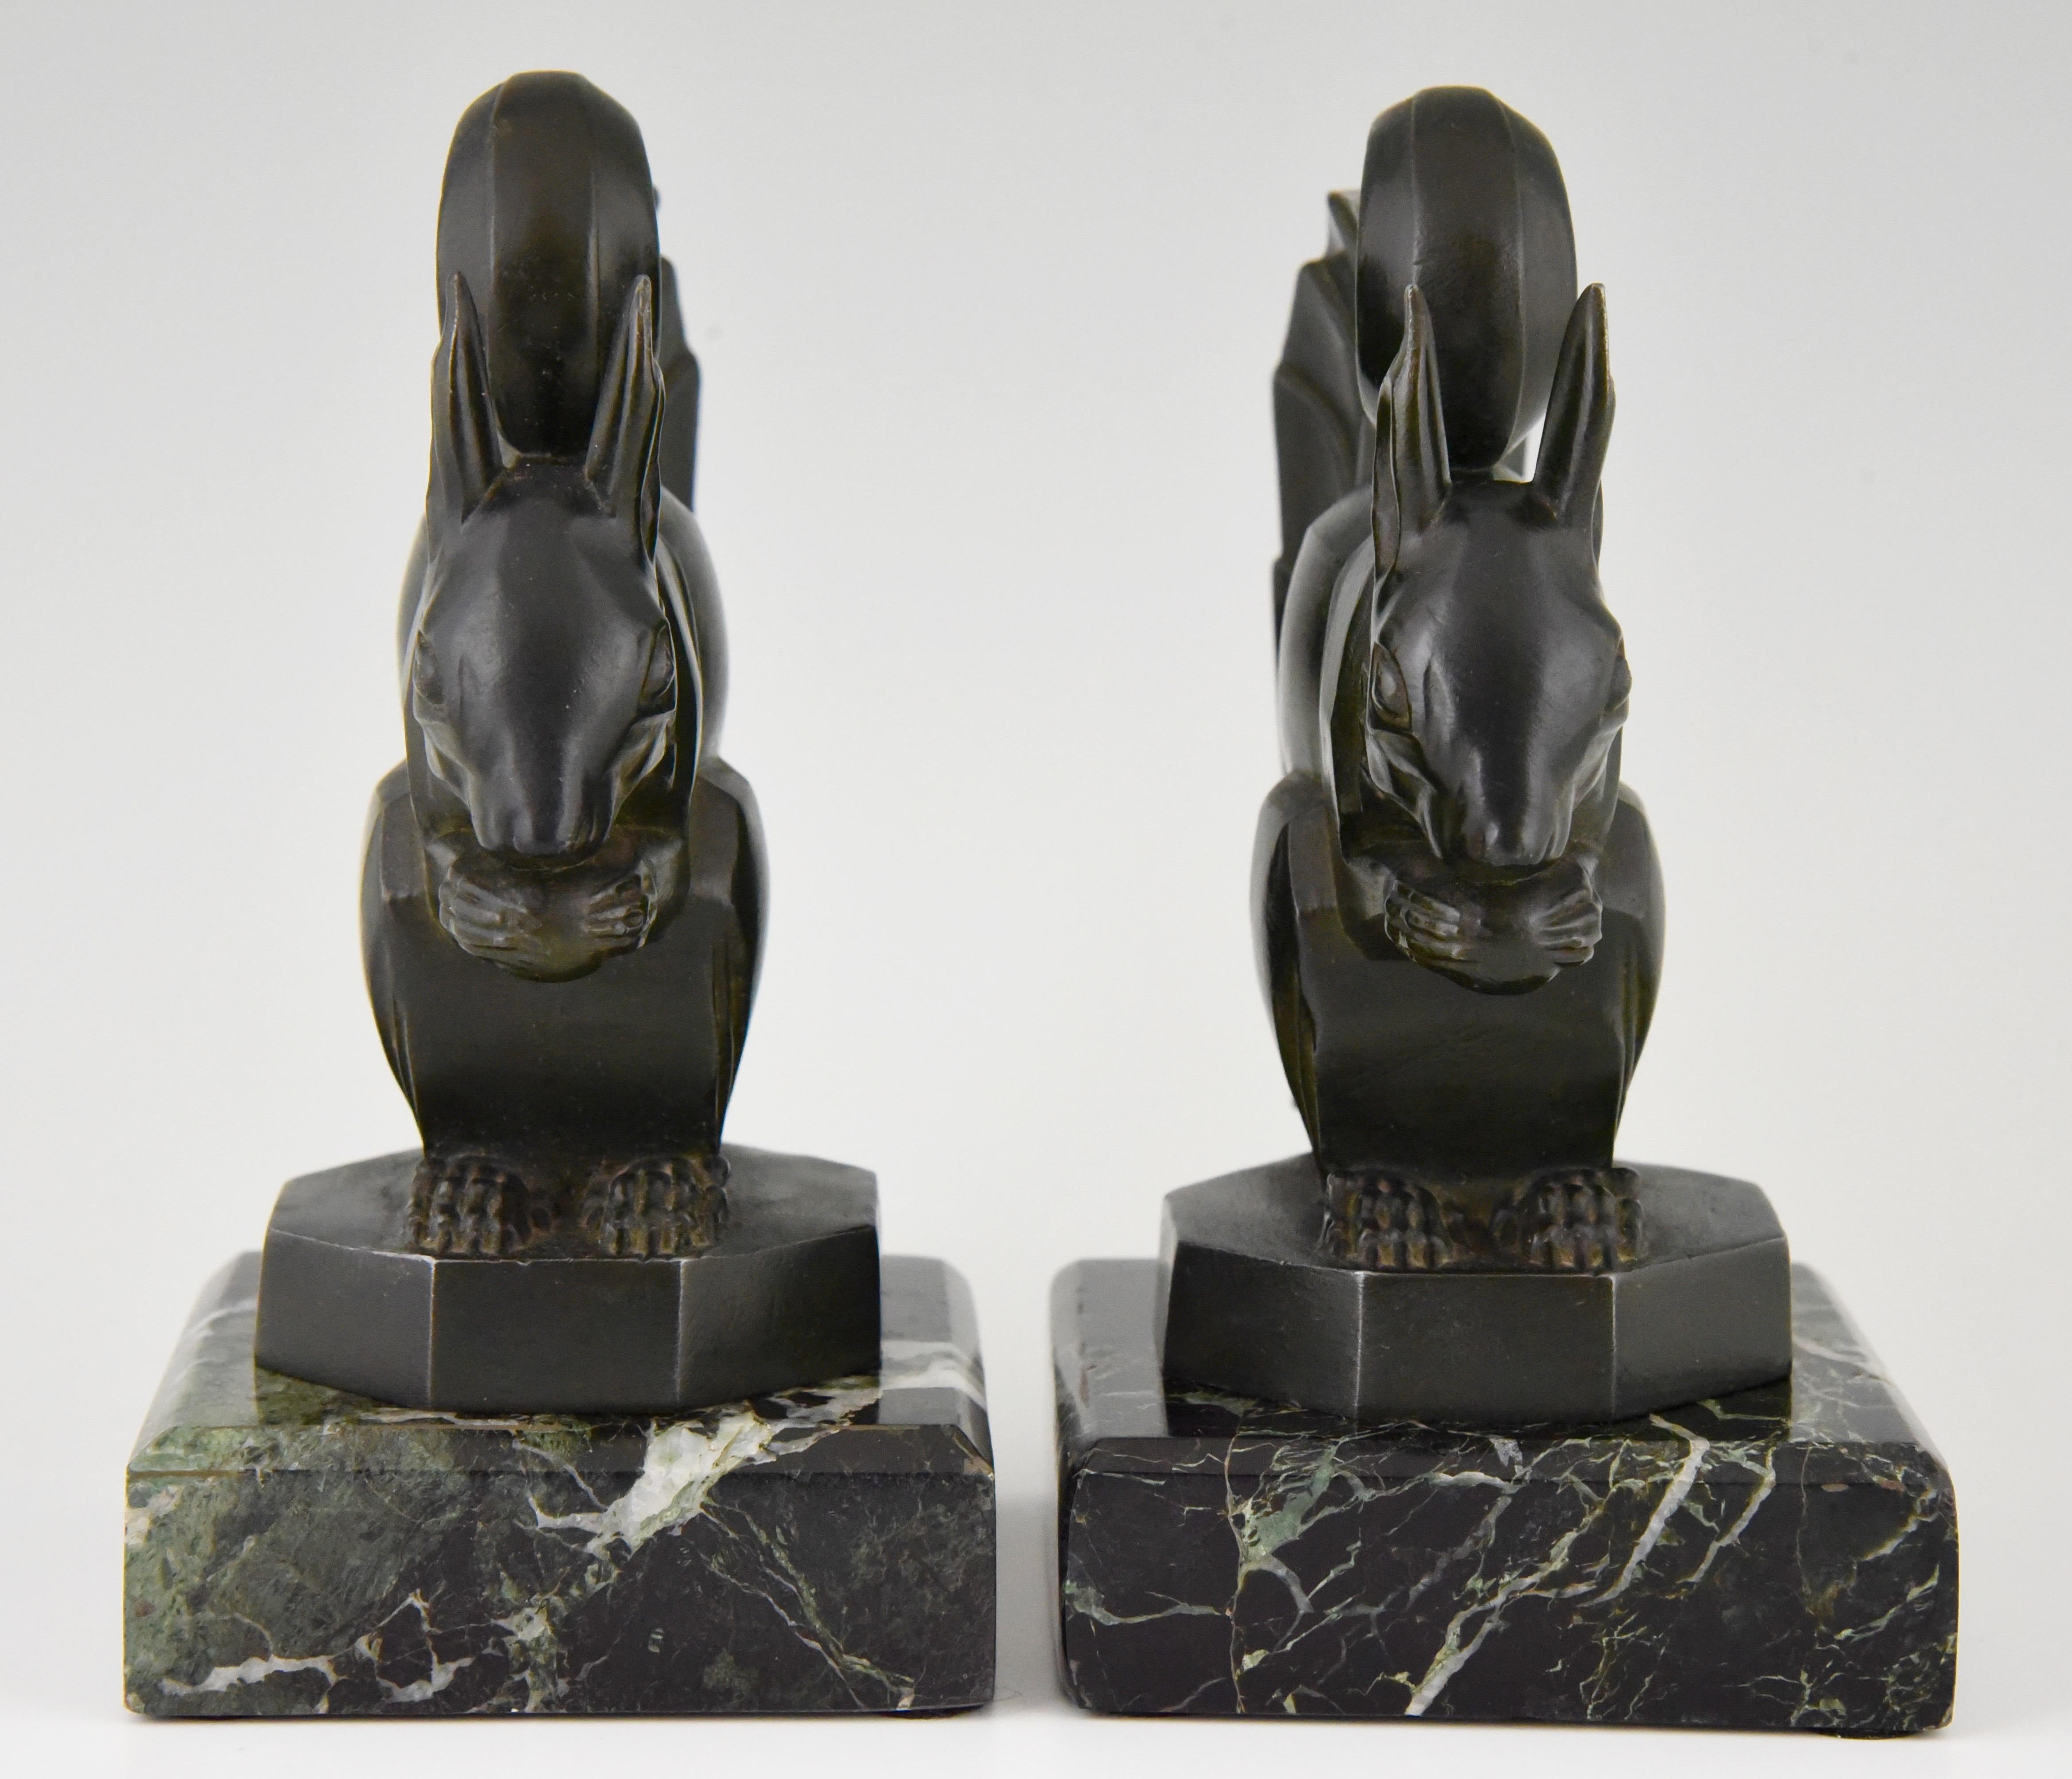 Patinated Art Deco Squirrel Bookends by Max Le Verrier France, 1930